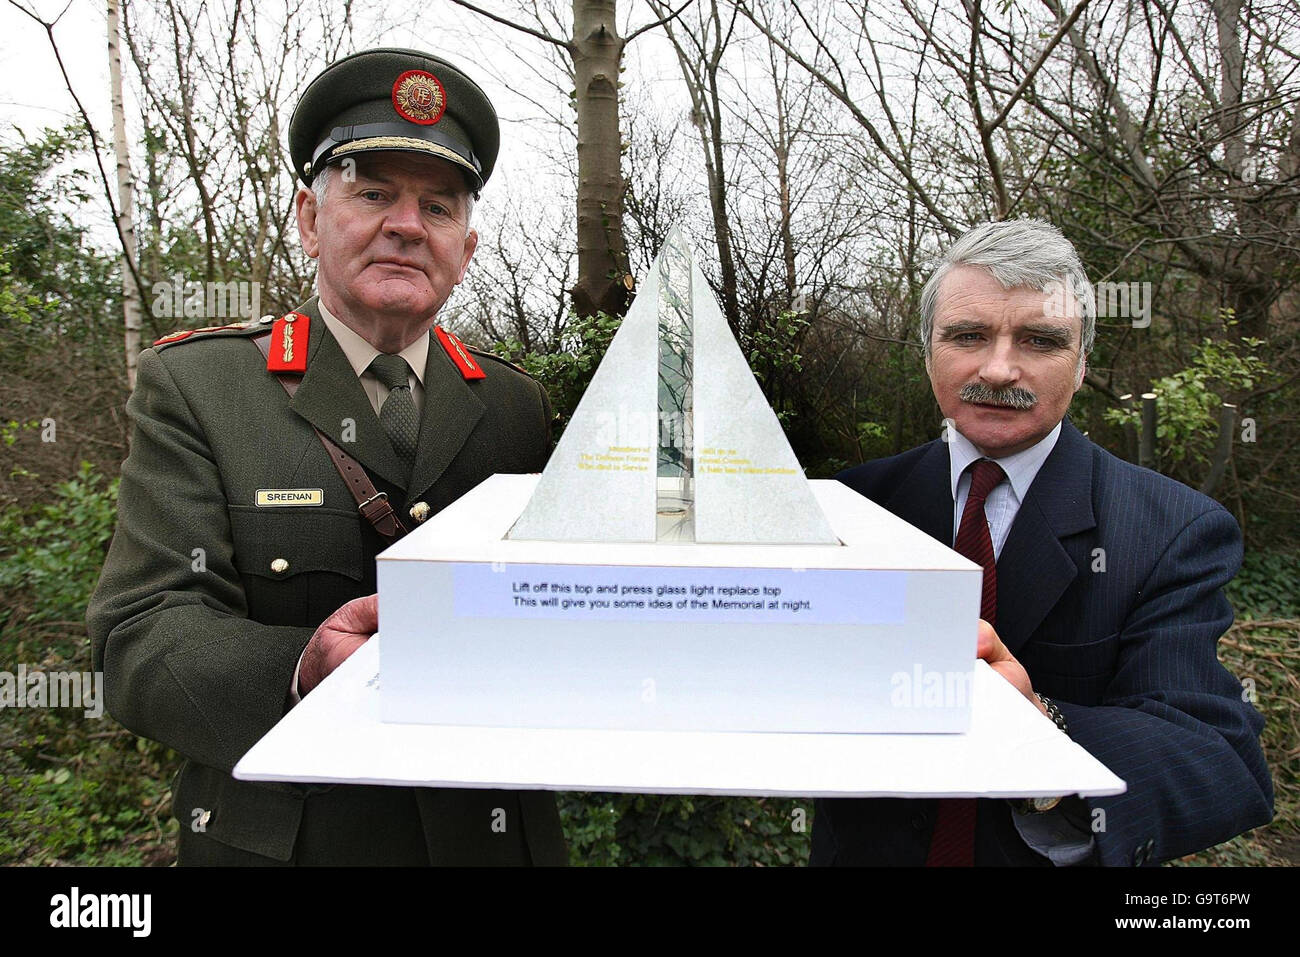 Chef of Staff of Defence Force Lt. Gen Jim Sreenan (left) and Minister for Defence Willie O'Dea TD in Merrion Square, Dublin. Pictured with a scale model for a new memorial for those who died in service. Stock Photo